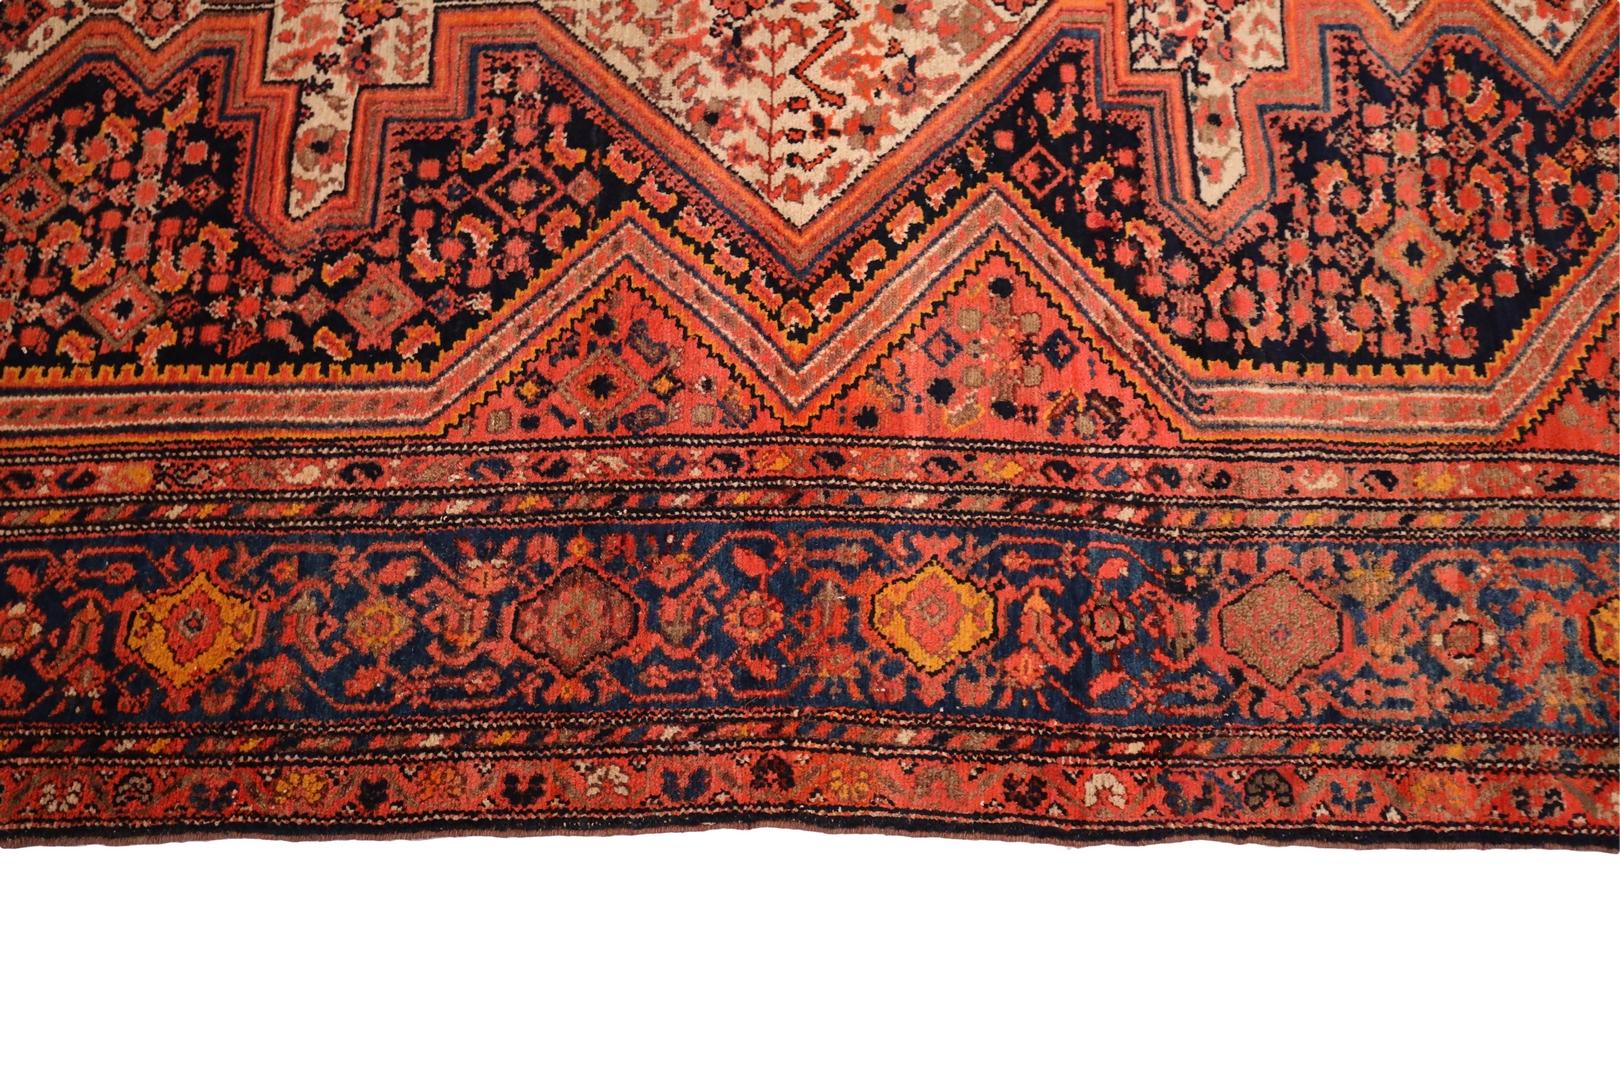 20th Century Malayer Antique Rug, Red Ivory - 4'6